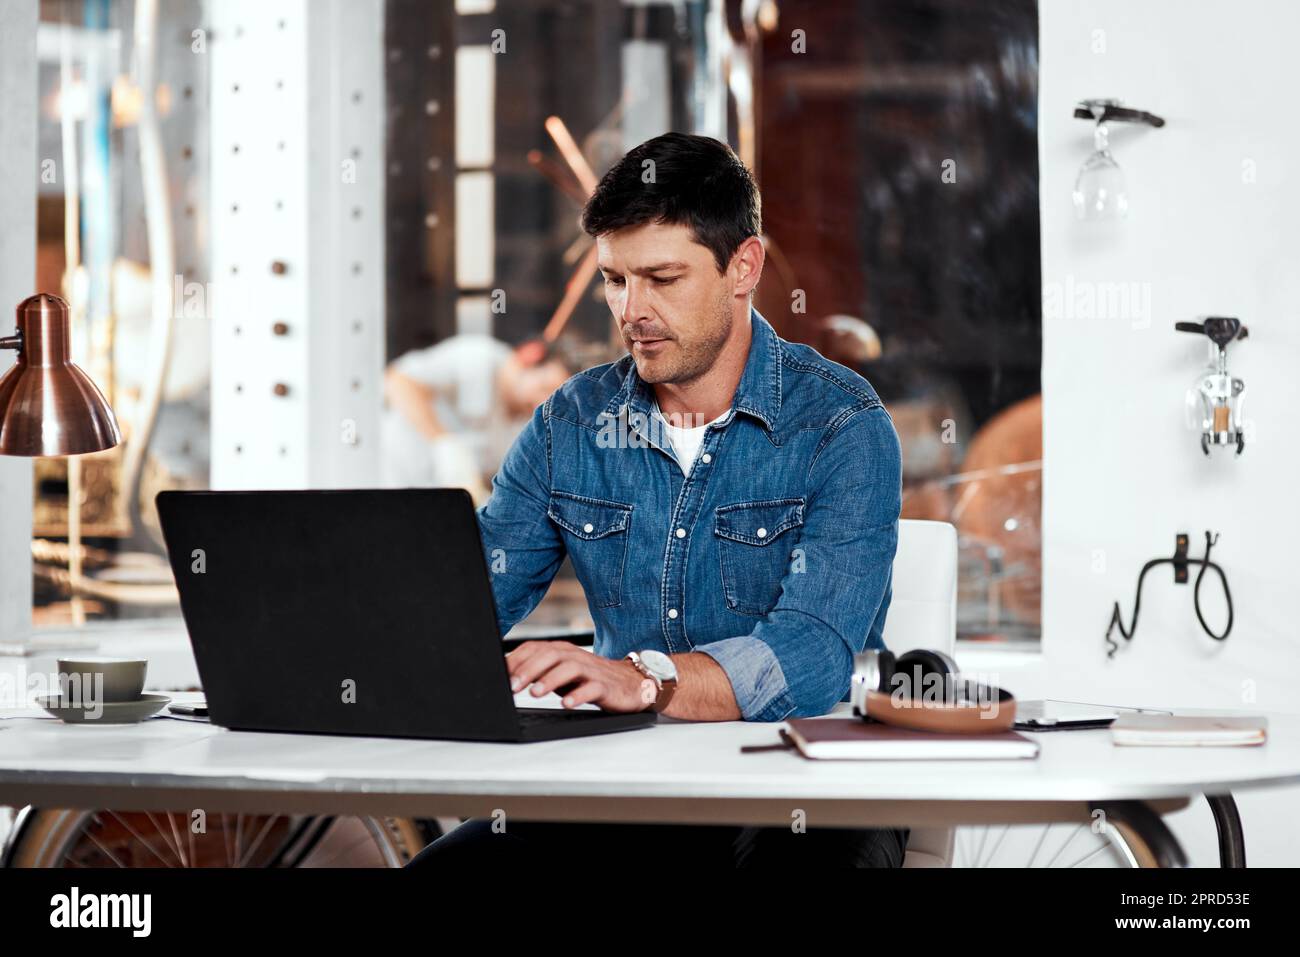 Working hard is second nature to him. a handsome young businessman working on a laptop in an office inside his workshop. Stock Photo